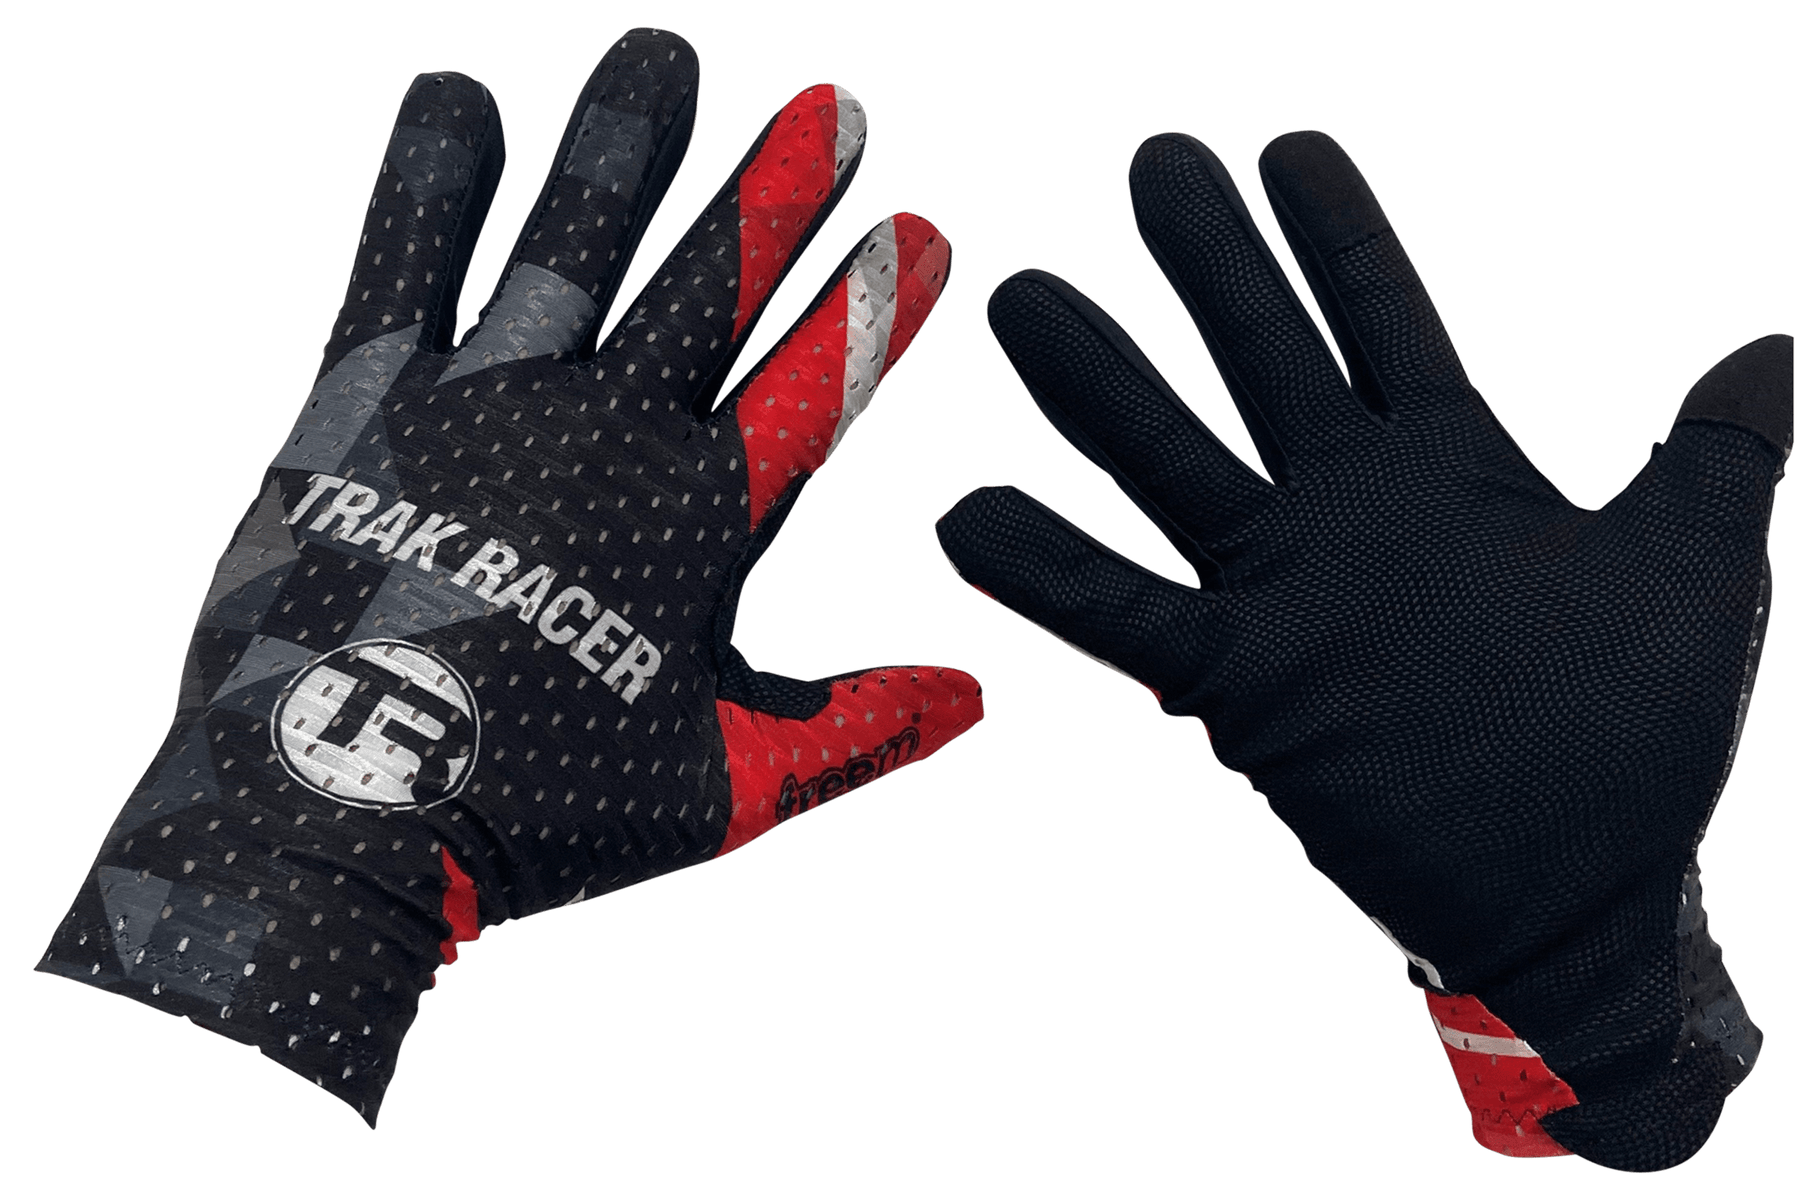 Sim Racing Gloves Buyer's Guide: Which are the Best?